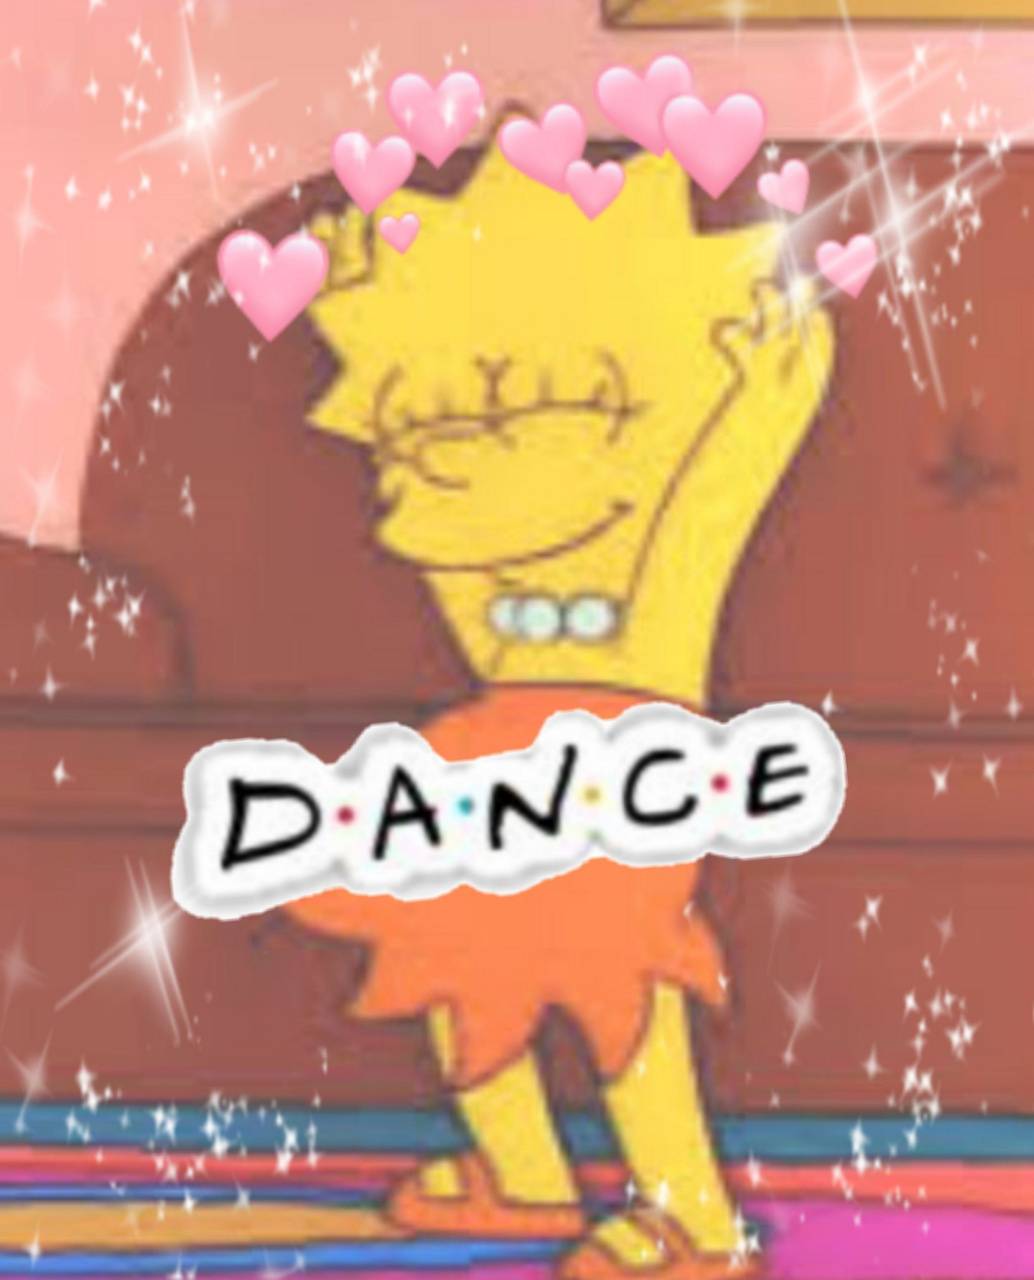 Dance is a fun activity that can be enjoyed by people of all ages. - Lisa Simpson